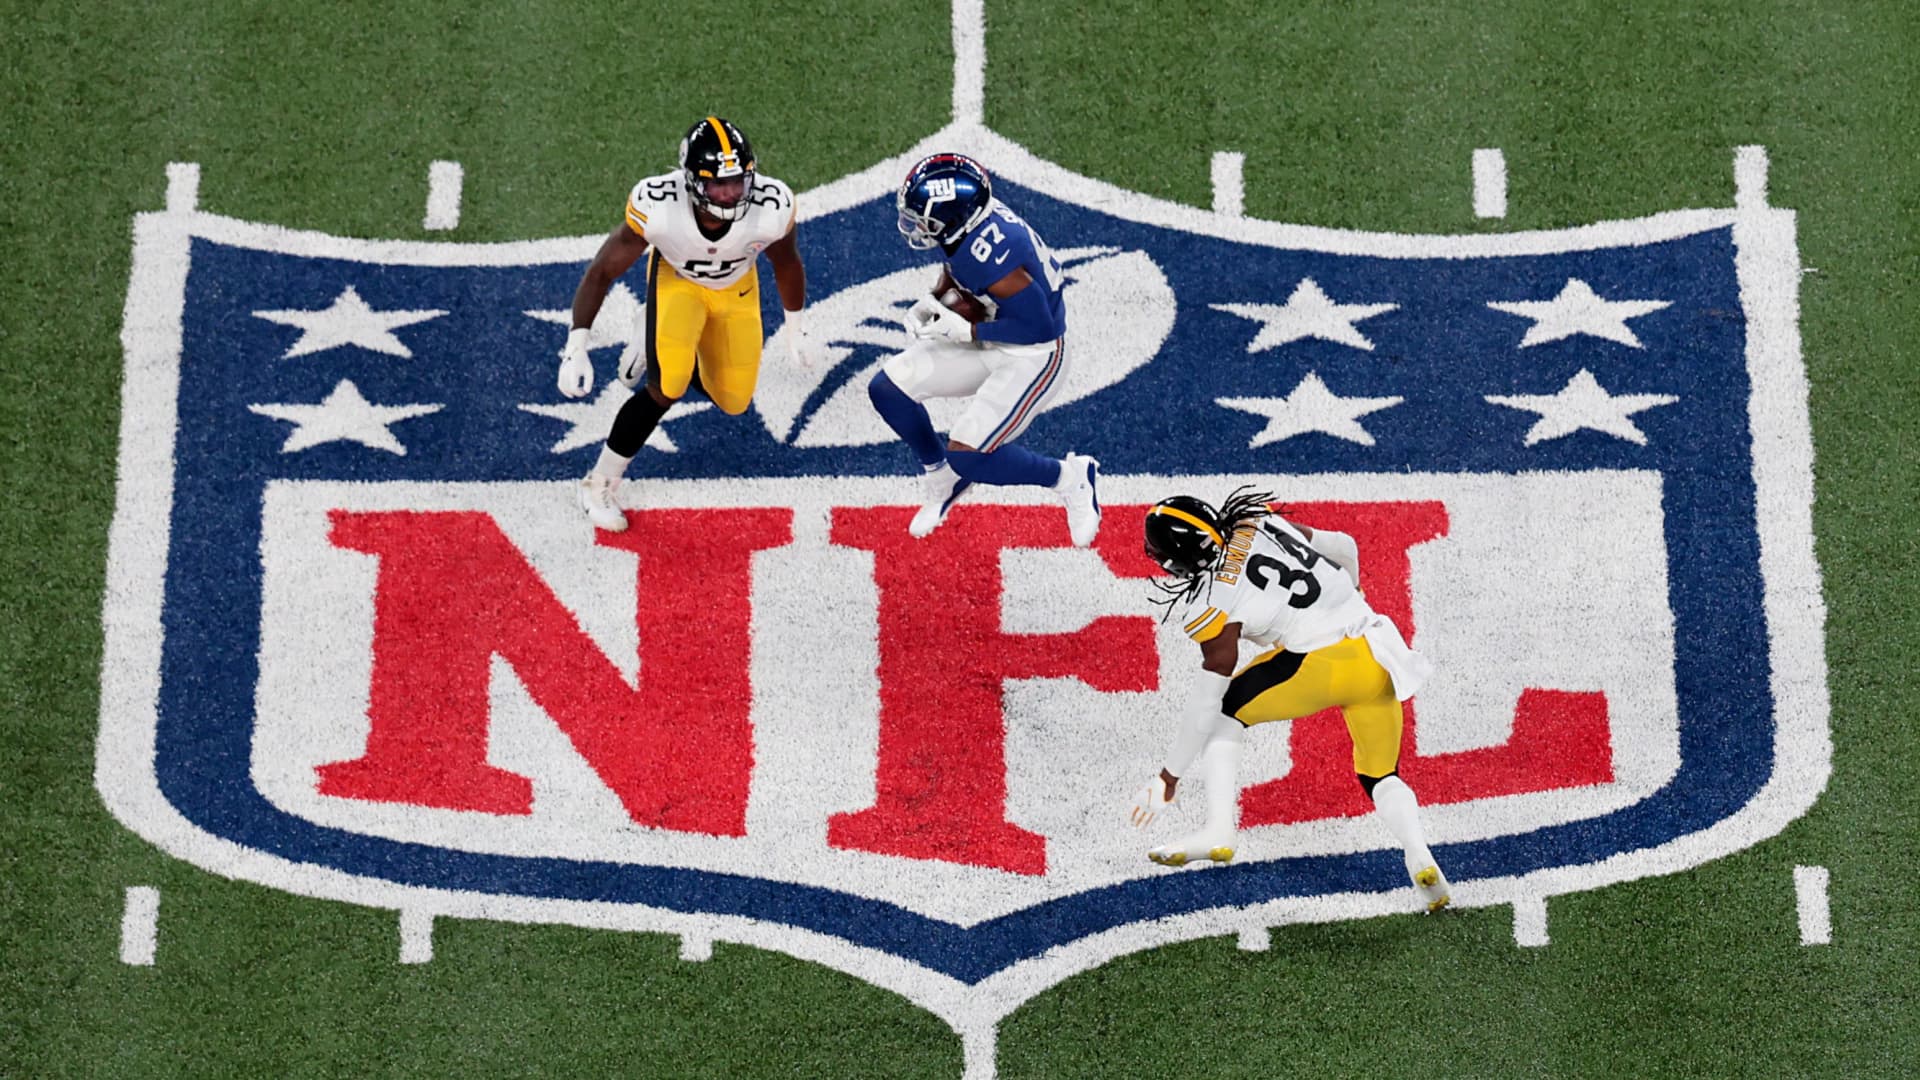 New York Giants wide receiver Sterling Shepard (87) catches a pass in front of Pittsburgh Steelers strong safety Terrell Edmunds (34) and linebacker Devin Bush (55) during the first half at MetLife Stadium.